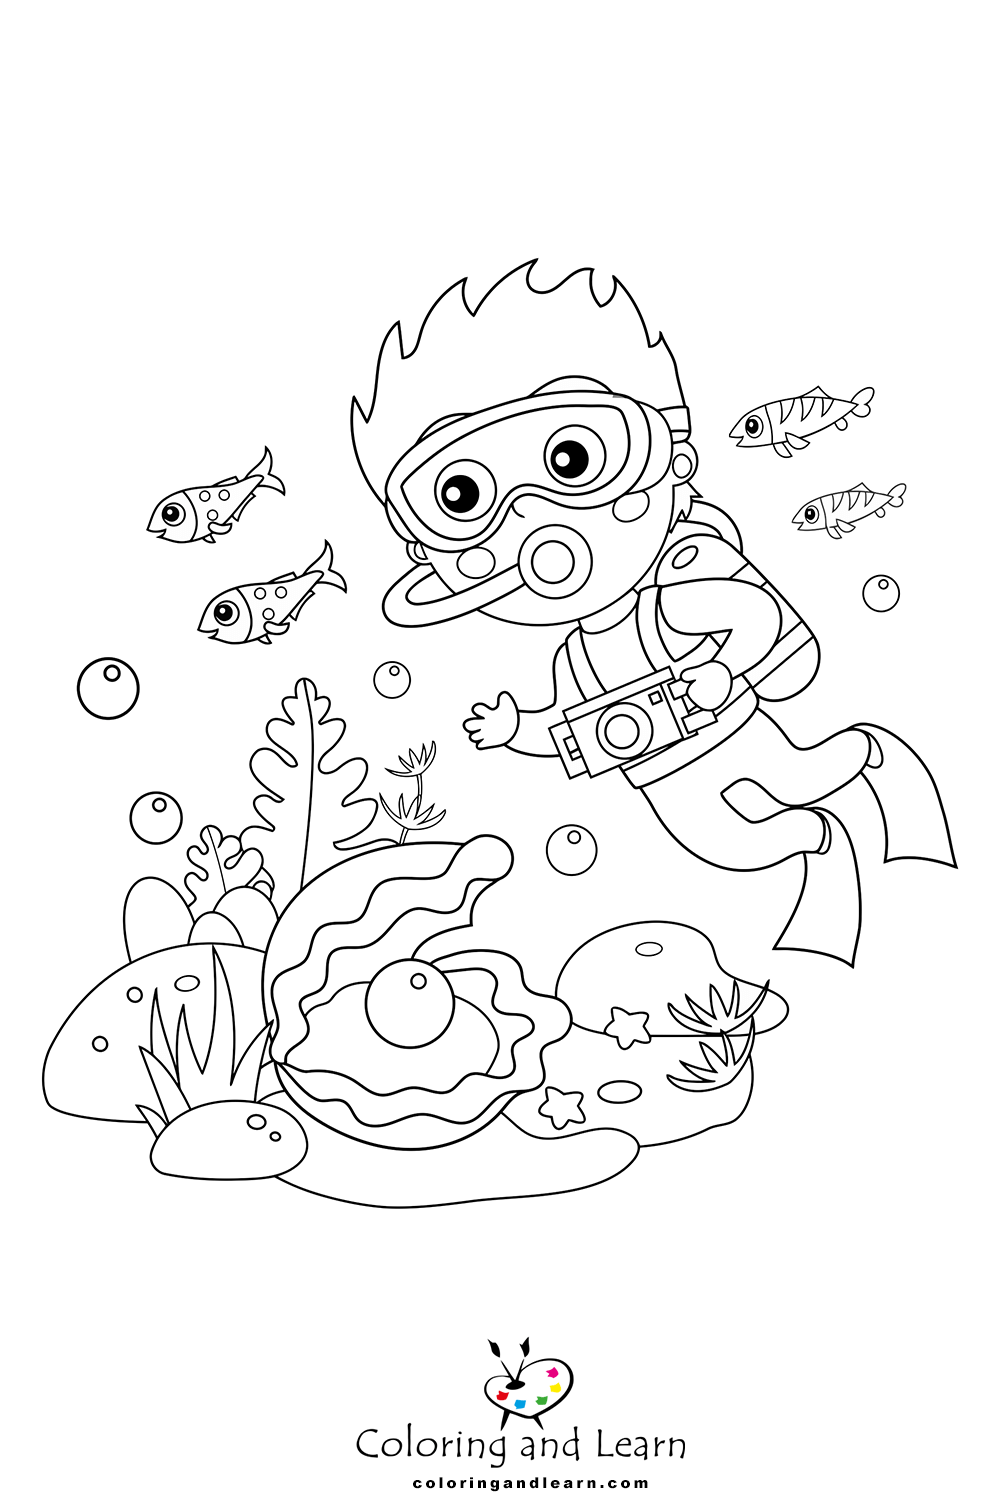 Diving coloring pages